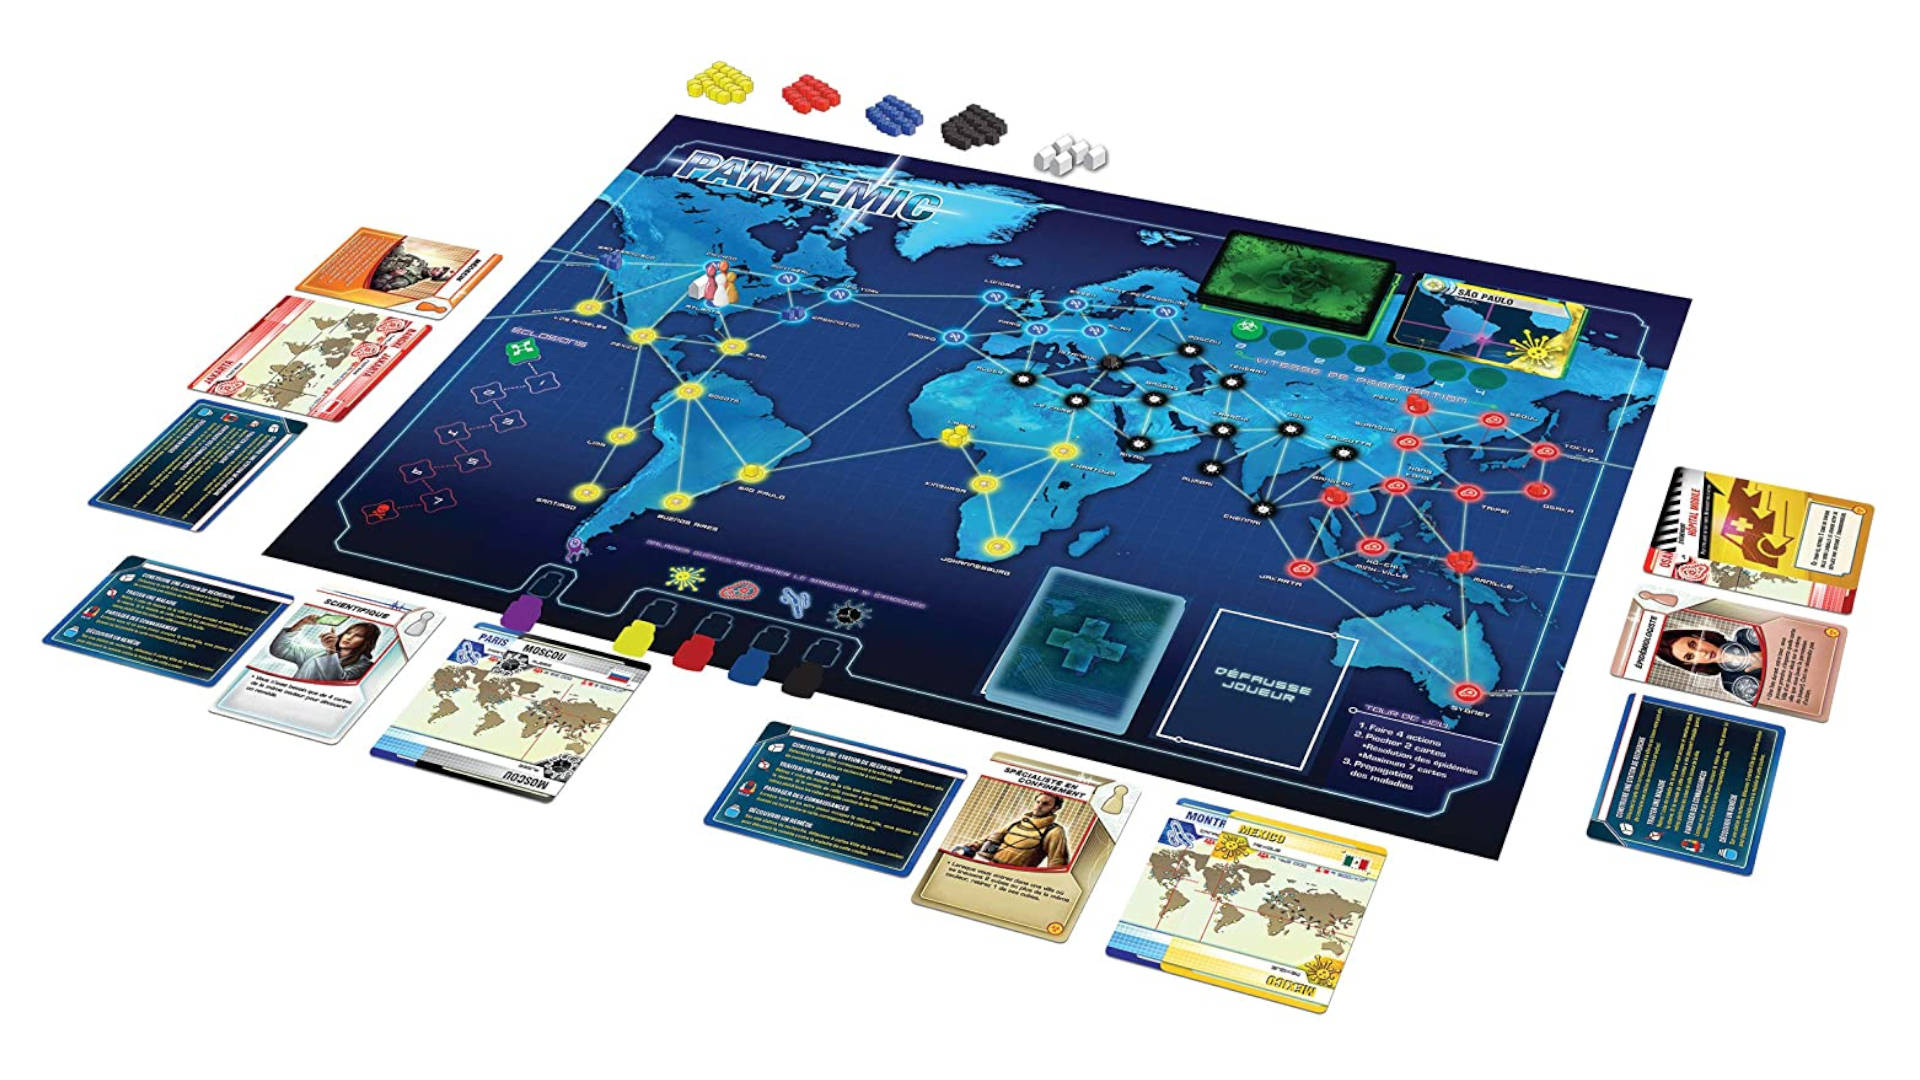 Fun board games Pandemic game board and cards